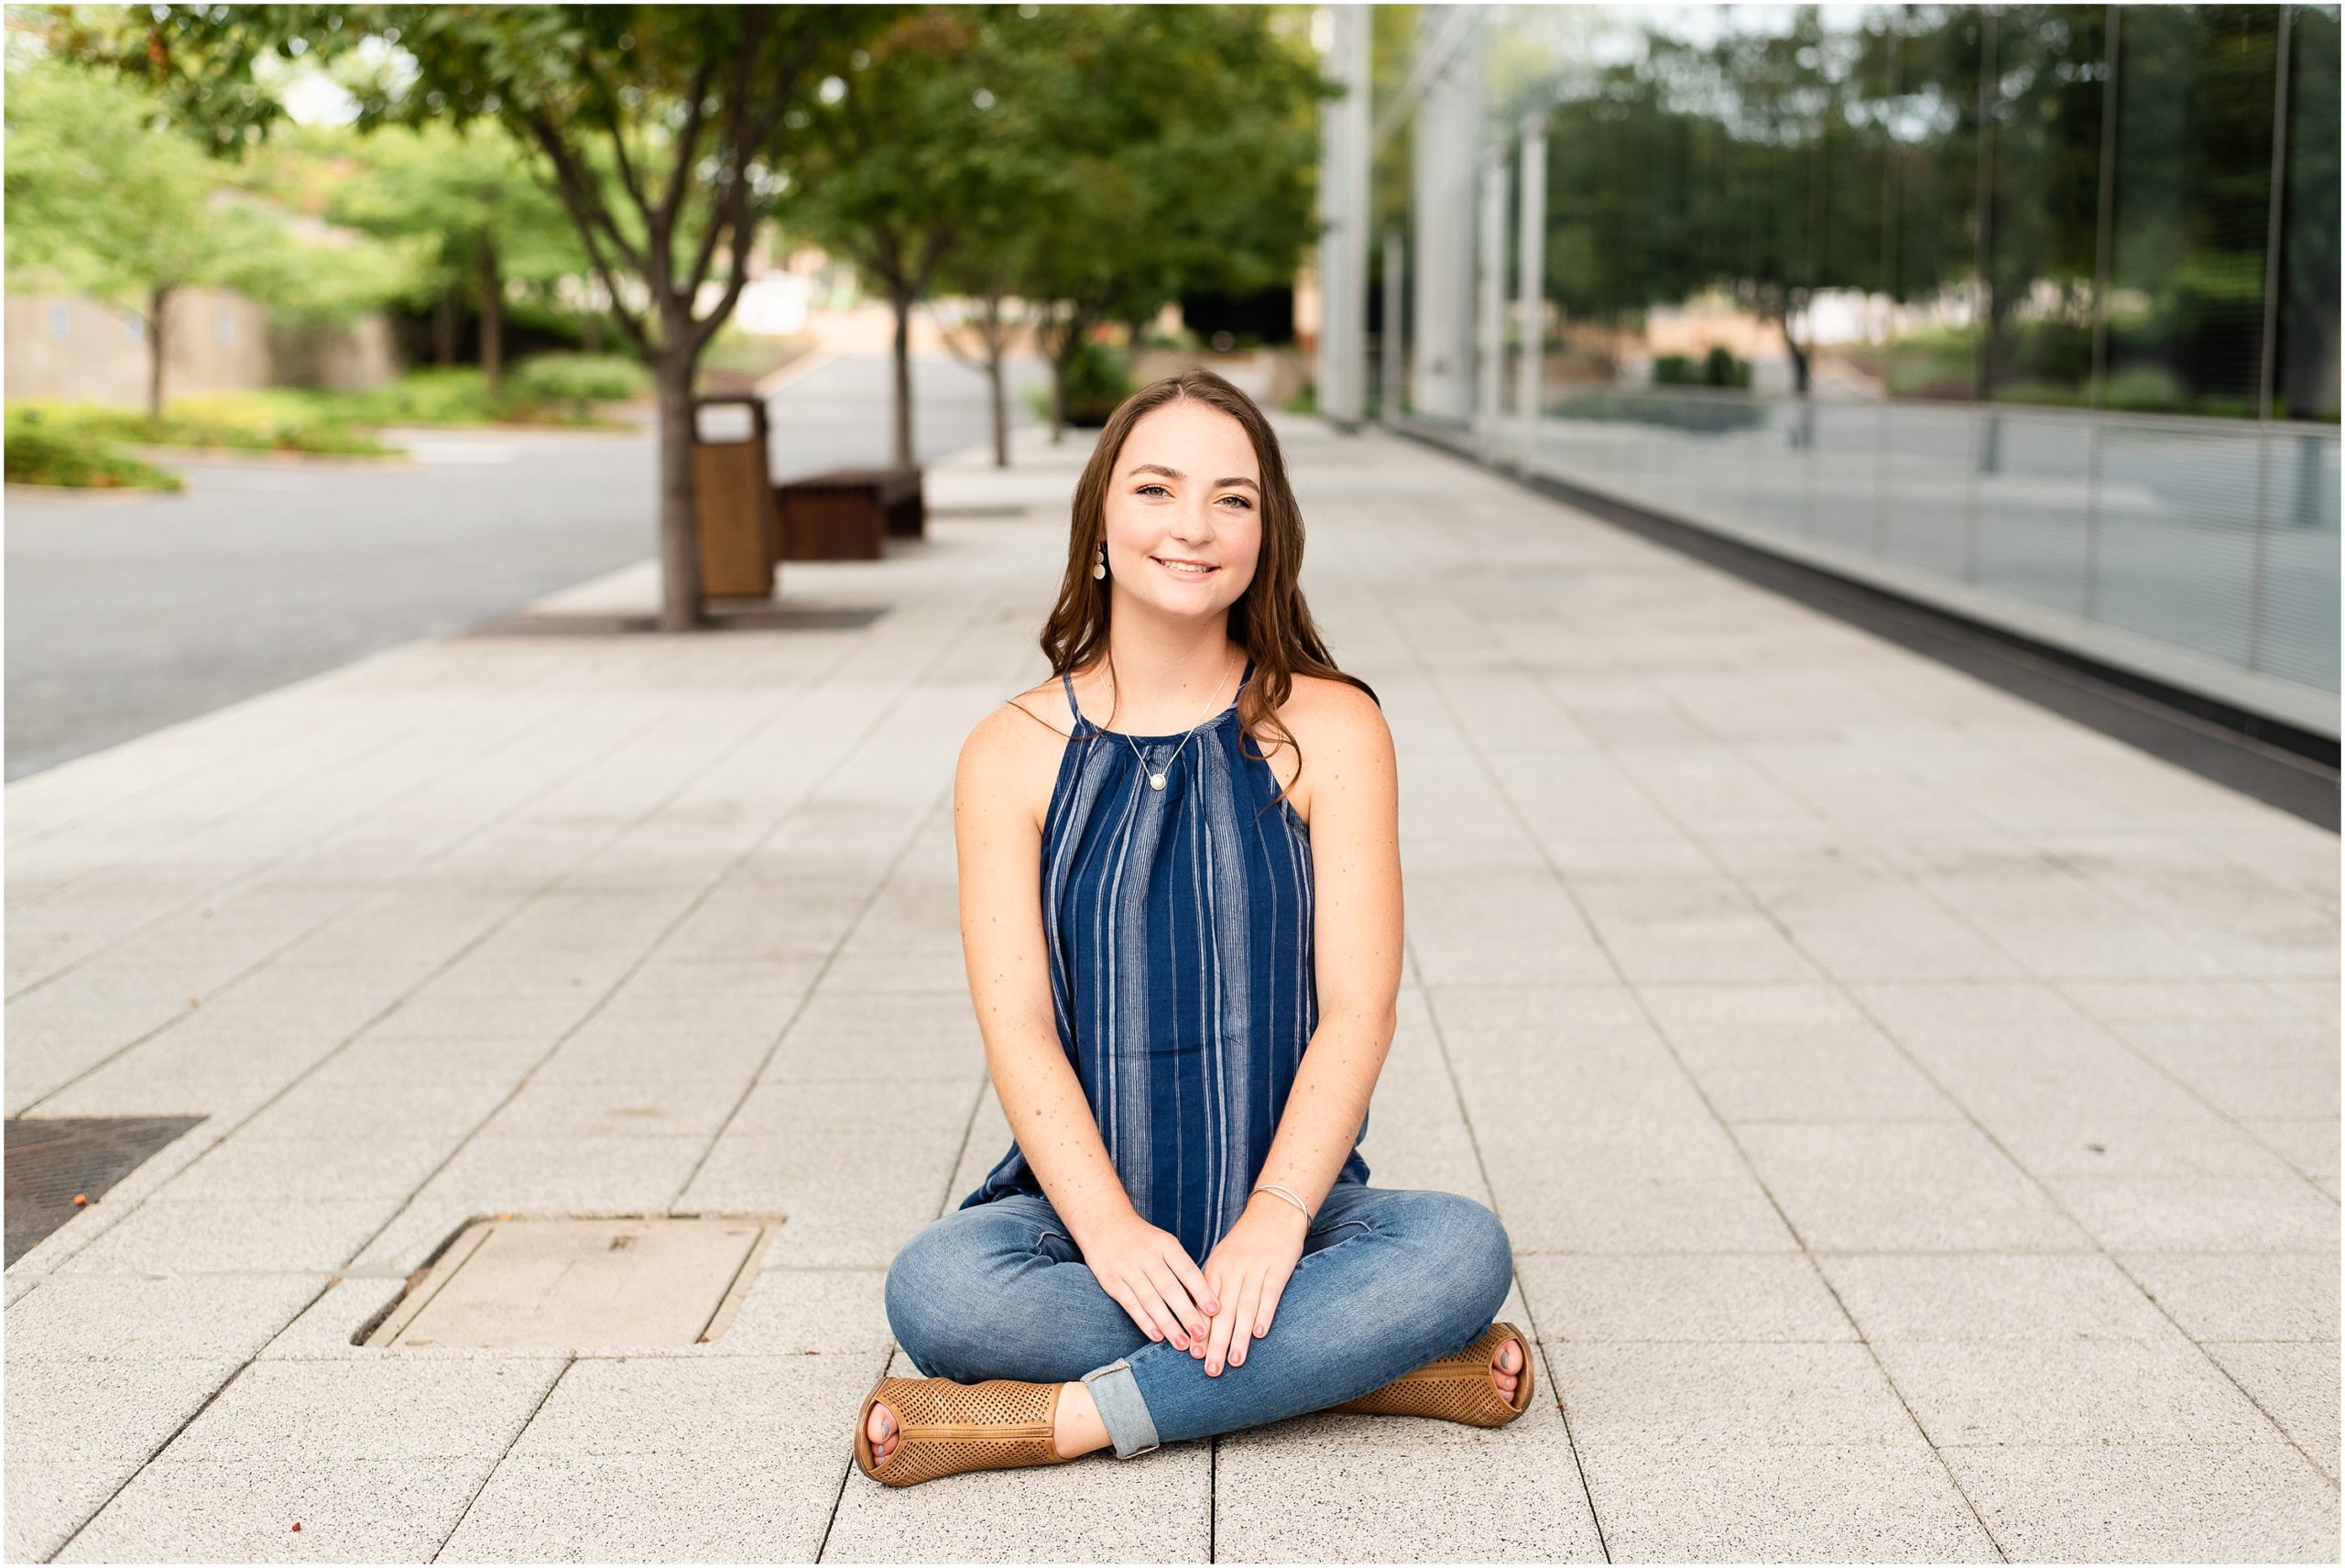 jchs senior session in downtown Jefferson City, mo for senior girl wearing blue shirt by central bank building